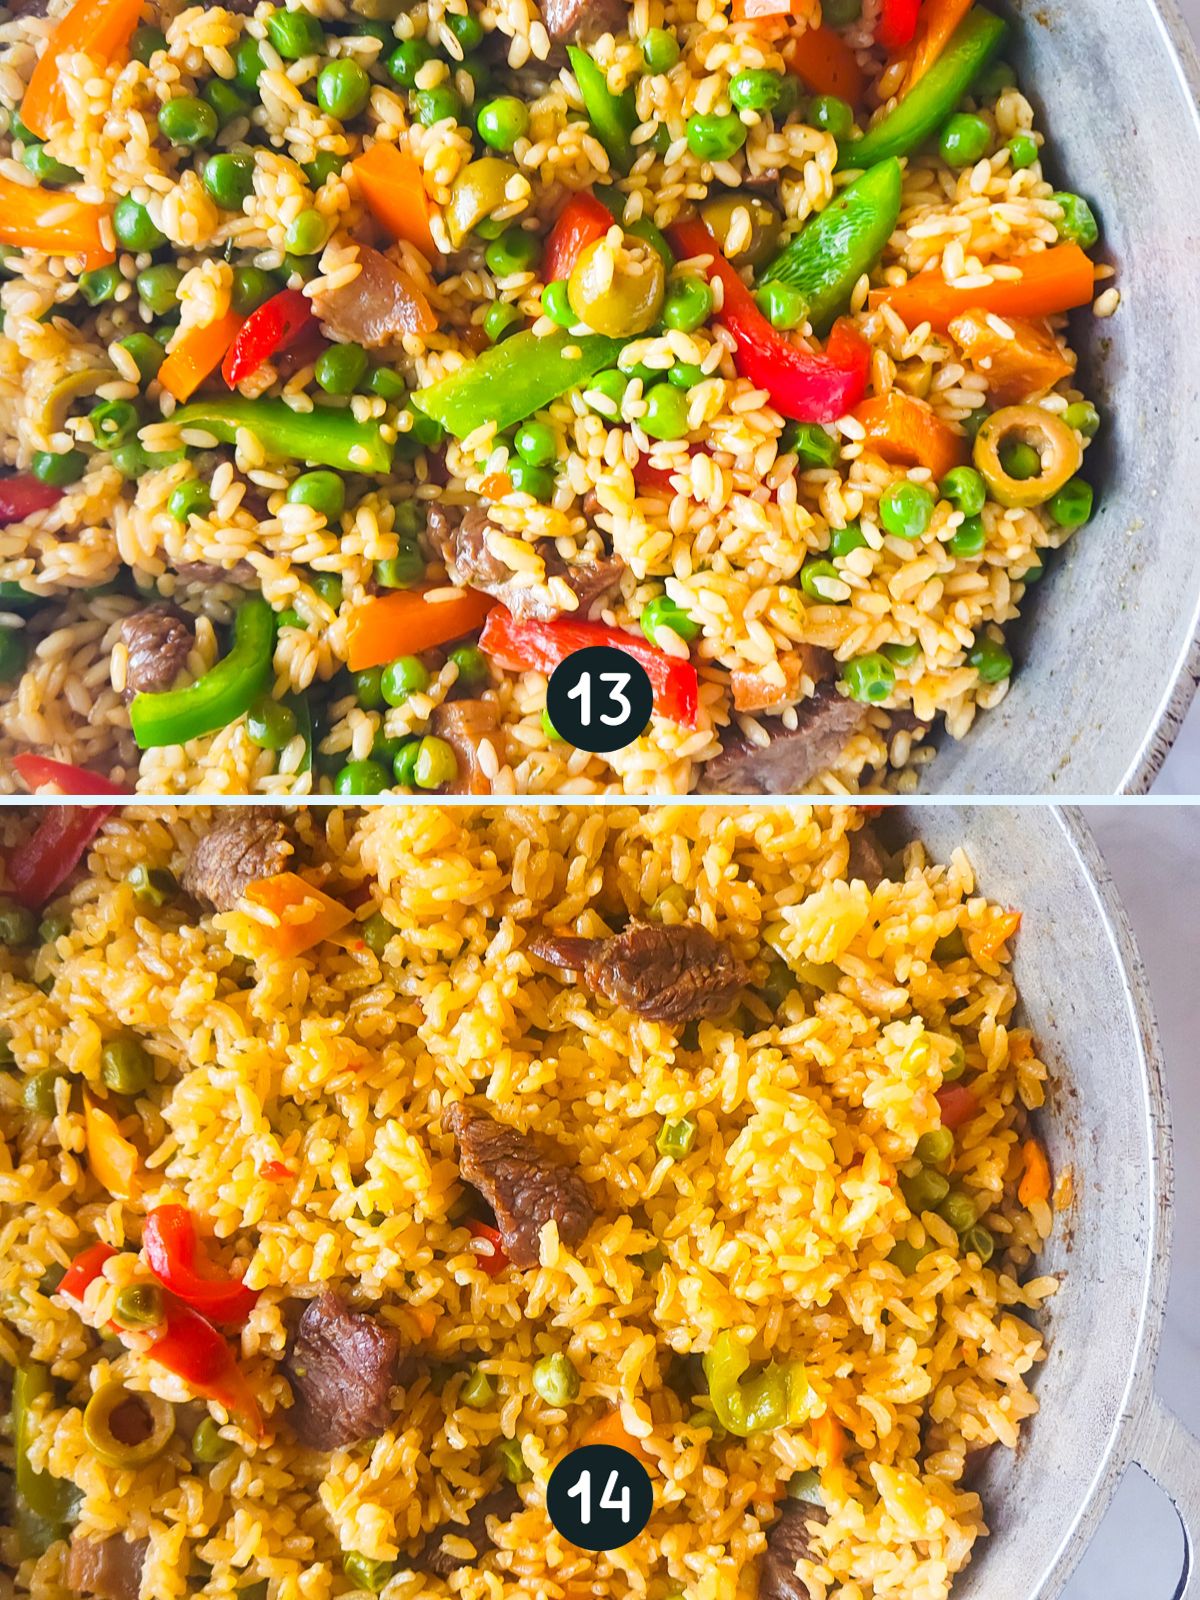 A collage of images showing steps 13-14 of arroz con carne recipe.